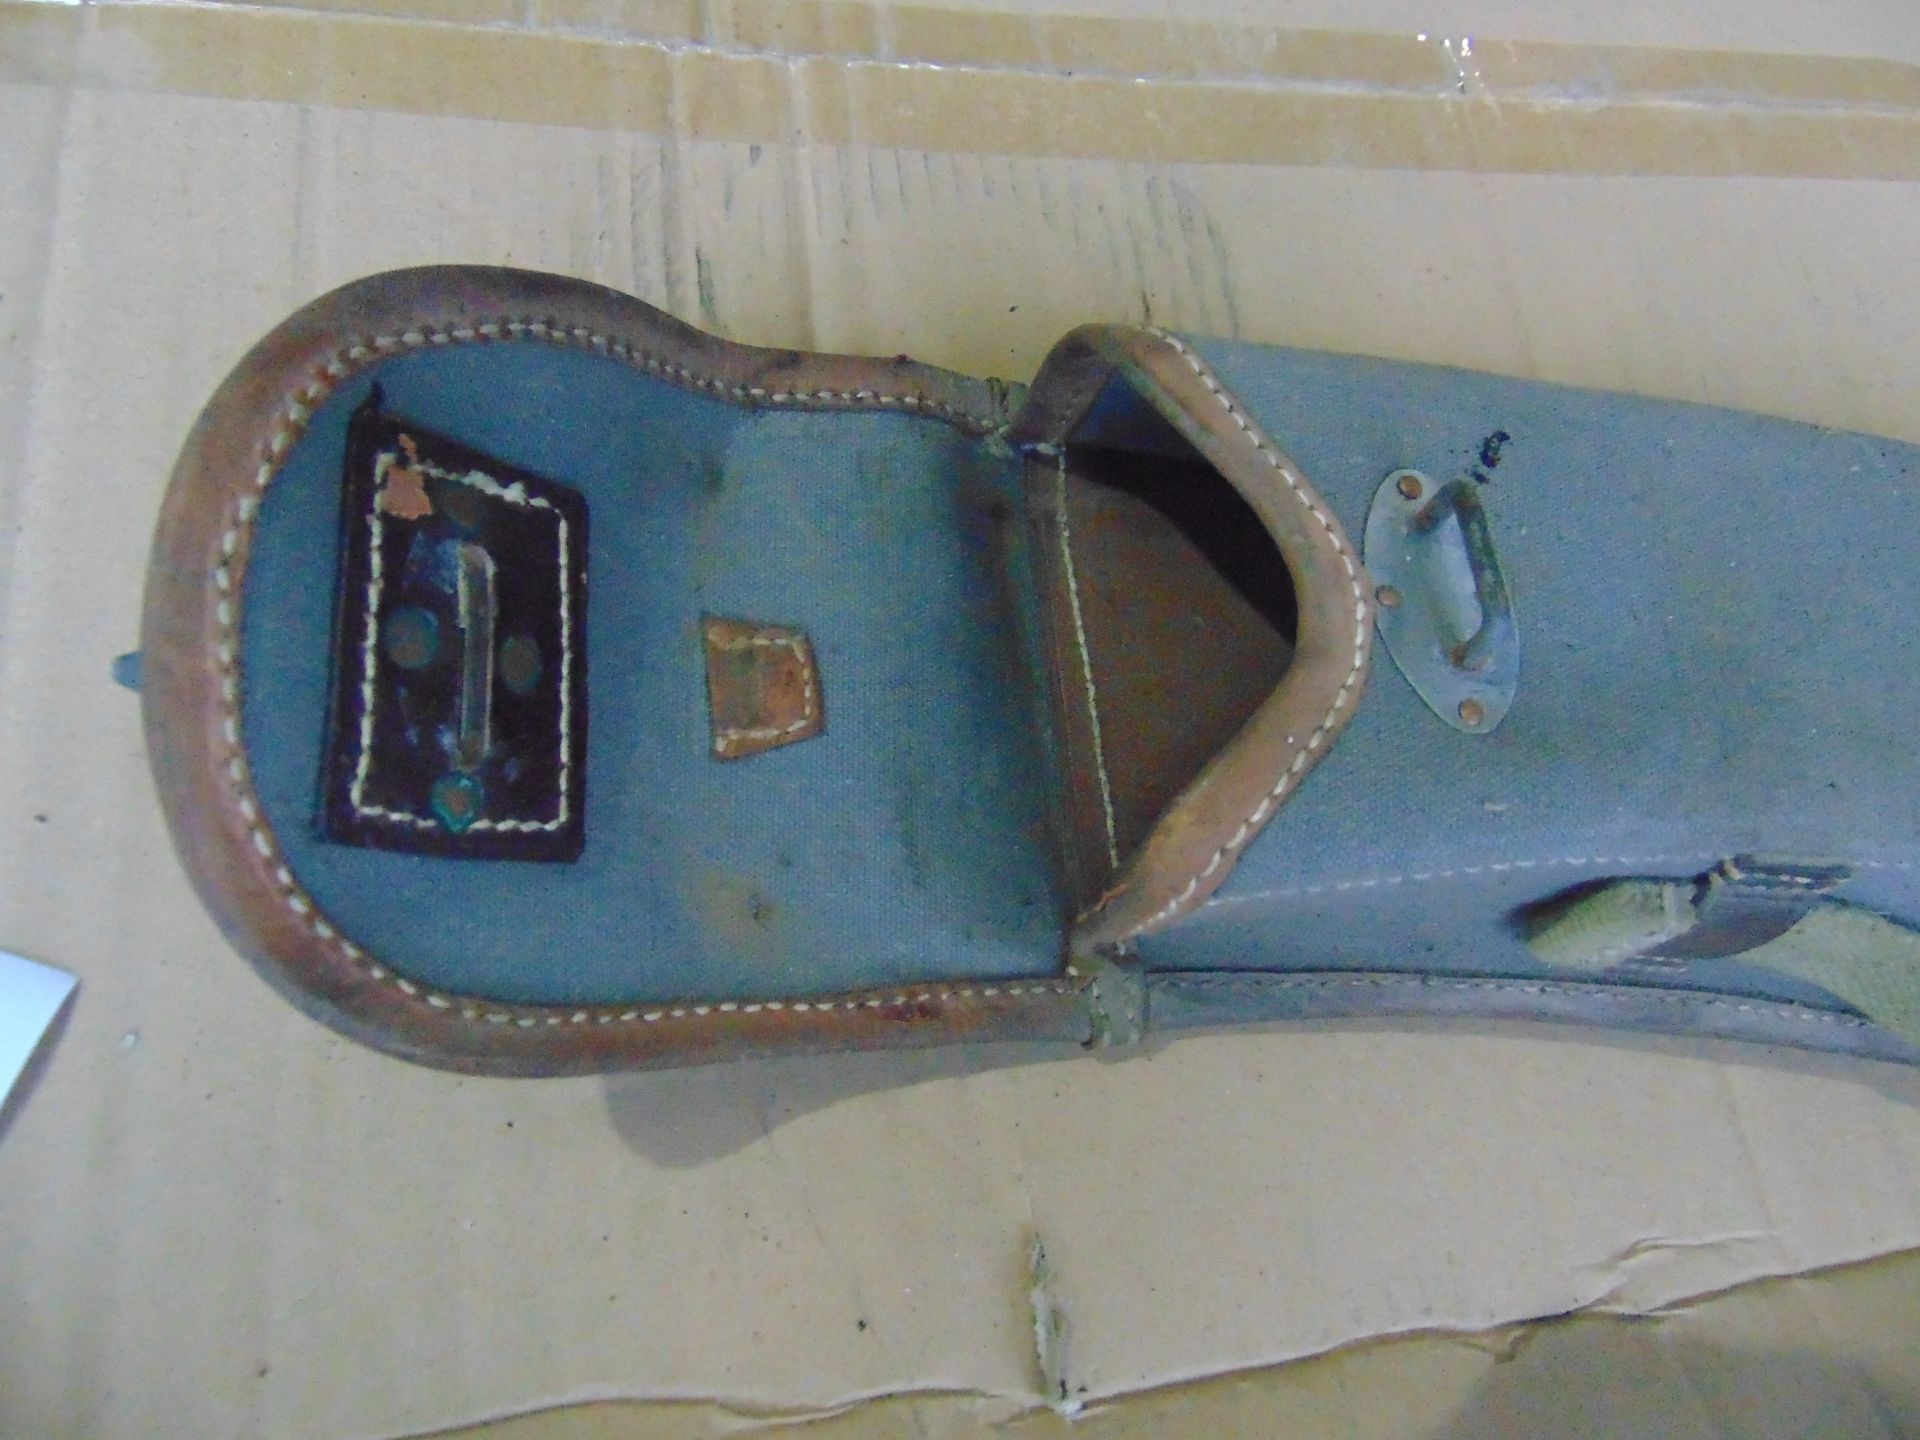 ORIGINAL GERMAN WW2 MG 13 MAGAZINE POUCH IN EXCELLENT CONDITION - Image 6 of 6